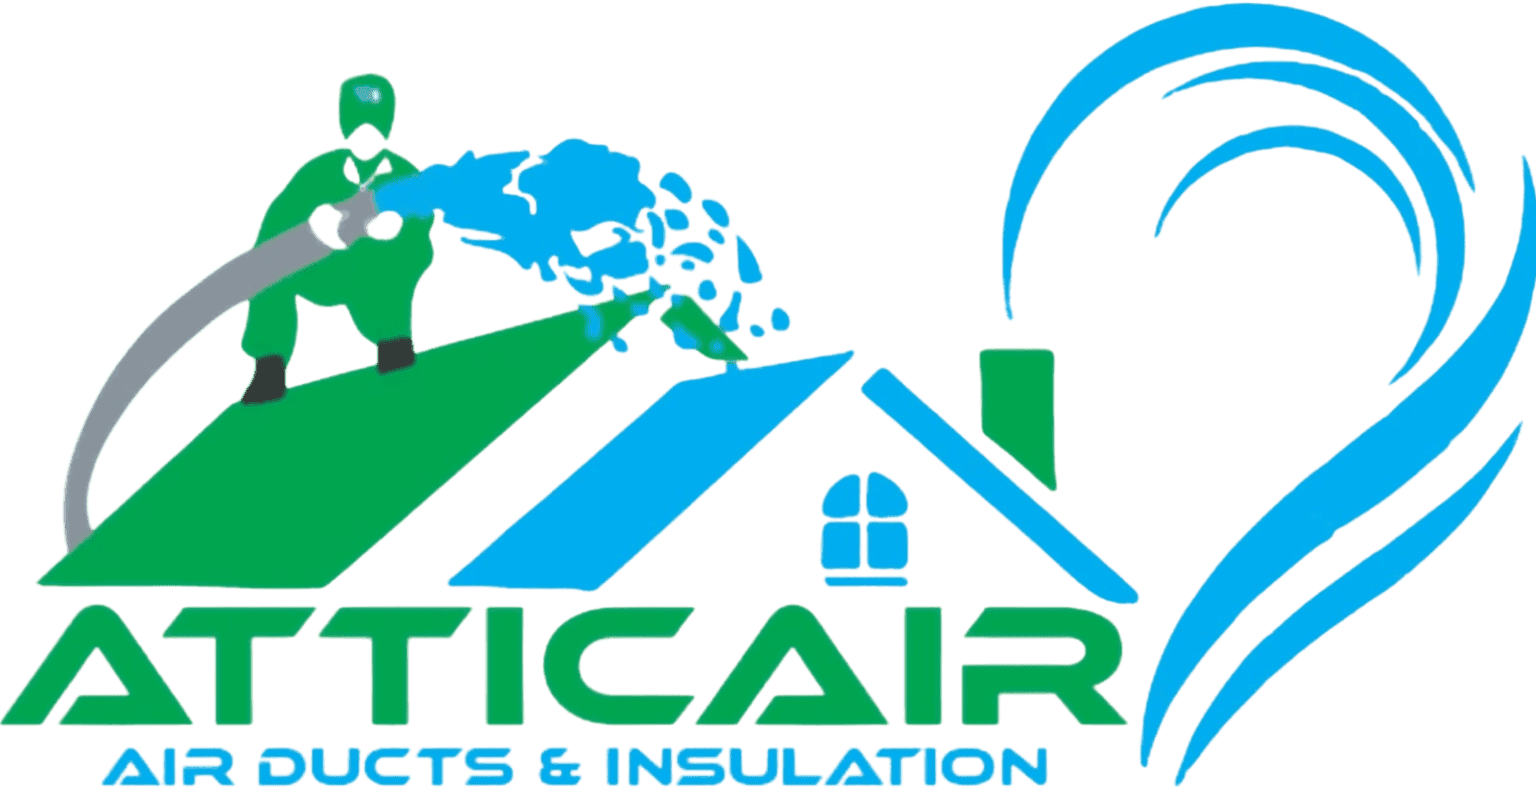 Air Duct Sealing in Houston TX | Atticair Ducts and Insulation